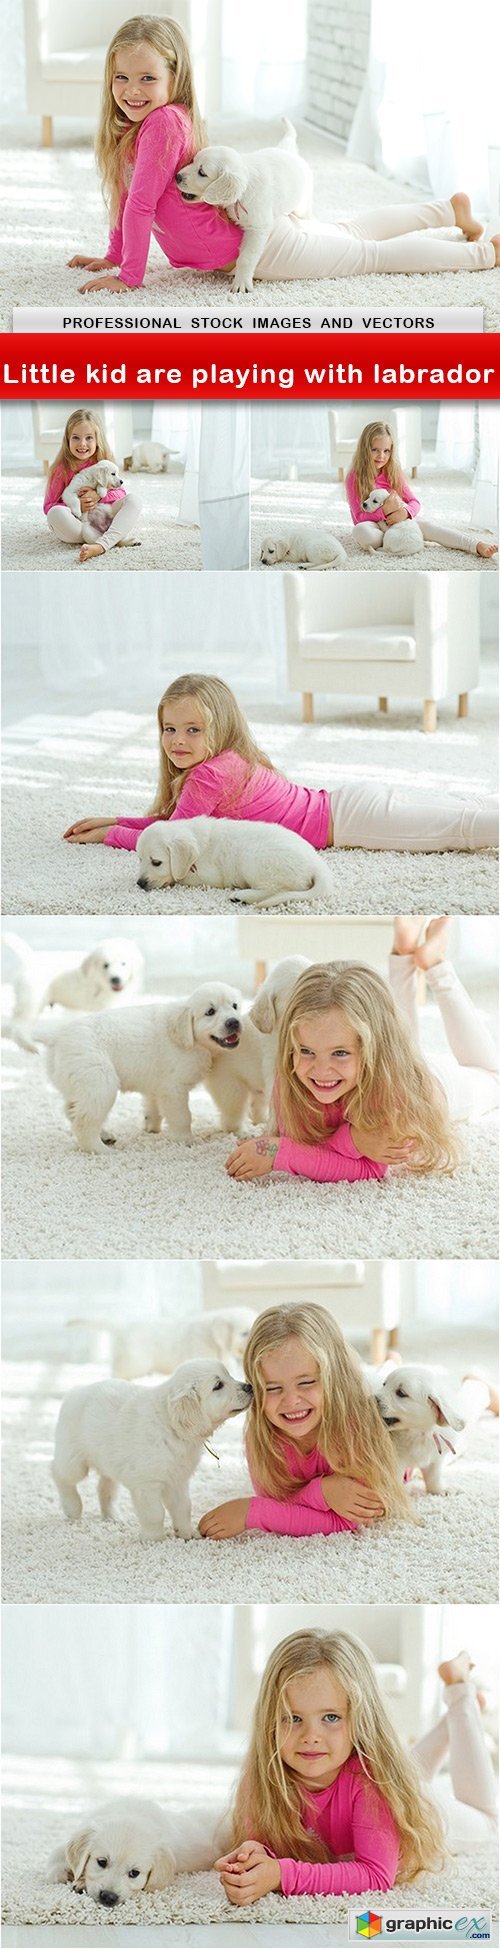 Little kid are playing with labrador - 7 UHQ JPEG